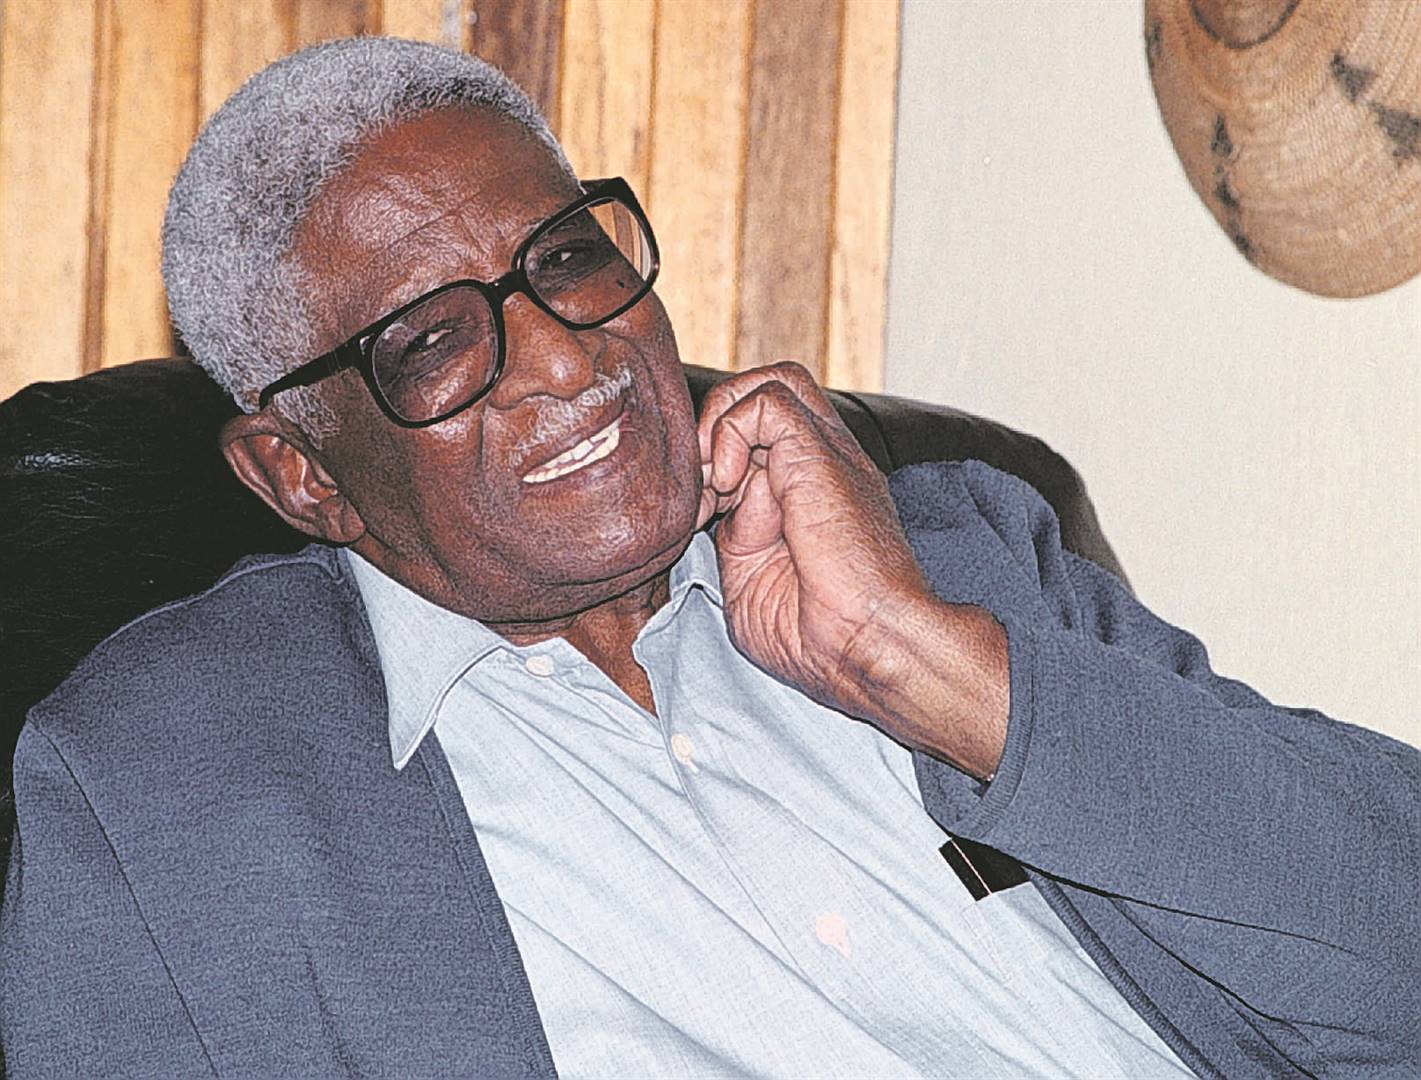 Sam Motsuenyane’s tireless efforts ensured that the voices of black business leaders were heard, leading to increased representation and opportunities in the business world.